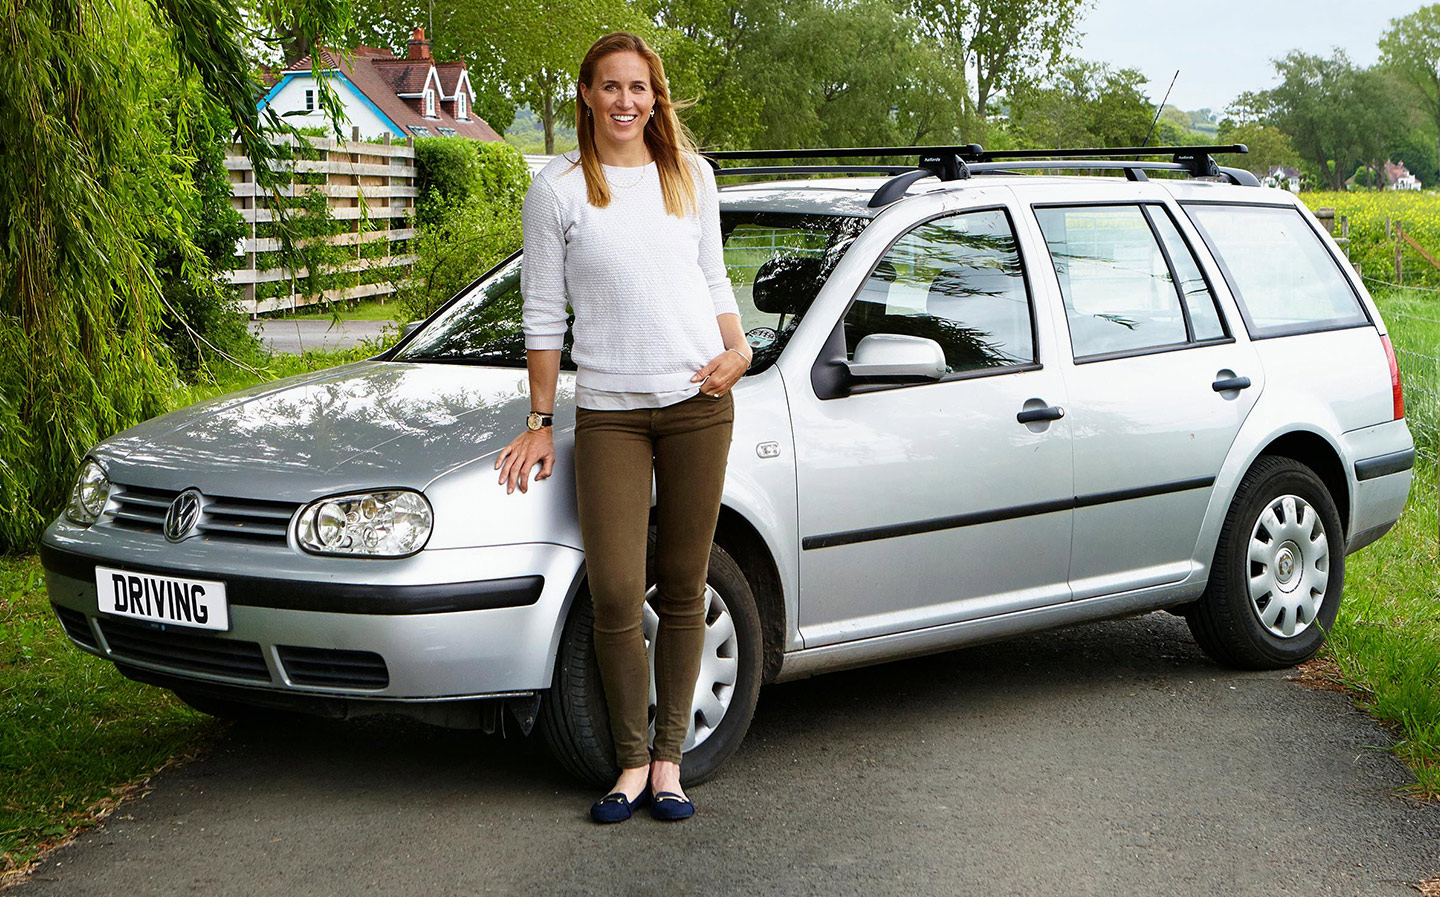 Me and My Motor: Helen Glover, Olympic rower